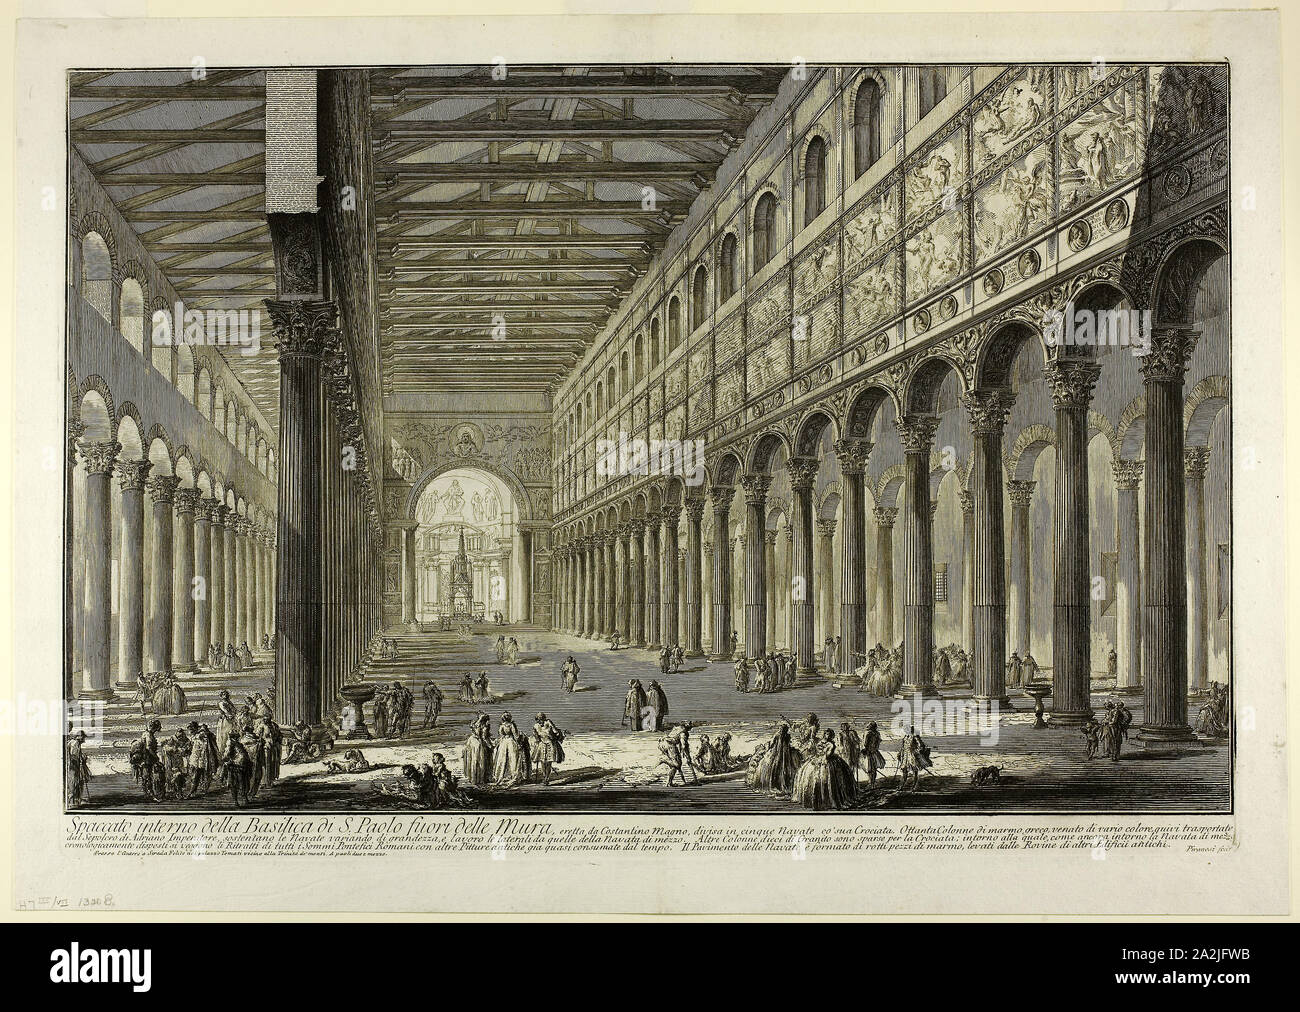 Cut-away view of the interior of the Basilica of S. Paolo fuori delle Mura [St. Paul outside the Walls], from Views of Rome, 1749, Giovanni Battista Piranesi, Italian, 1720-1778, Italy, Etching on heavy ivory laid paper, 392 x 609 mm (image), 415 x 613 mm (plate), 470 x 662 mm (sheet Stock Photo